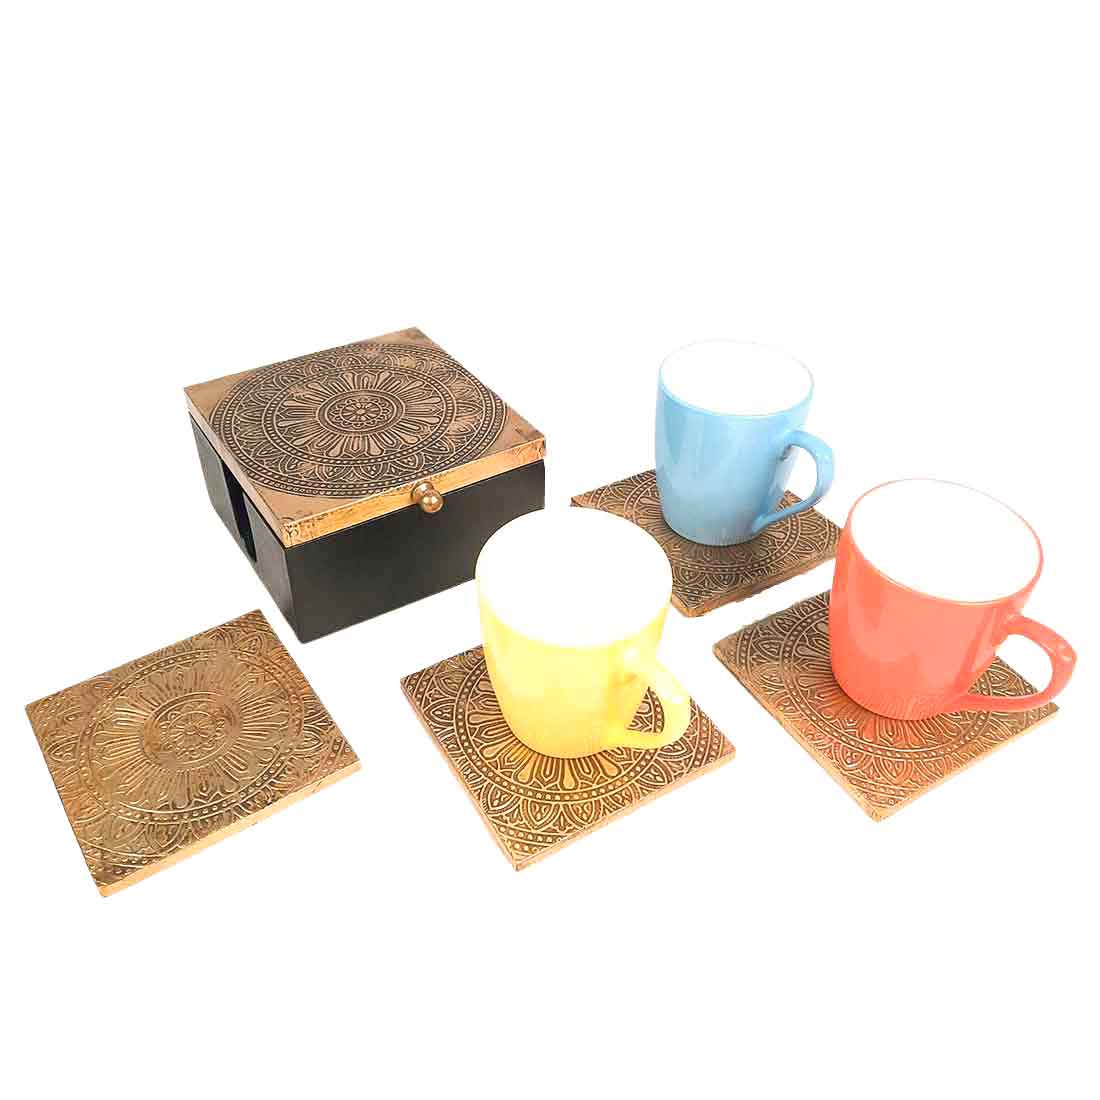 Tea Coasters | Brass Coffee Coaster Set With Box | Heat Pad | Dining Table Decor - For Kitchen, Bar, Tables, Hot Pots, Cups, Mugs - 5 Inch (Set of 6) - Apkamart